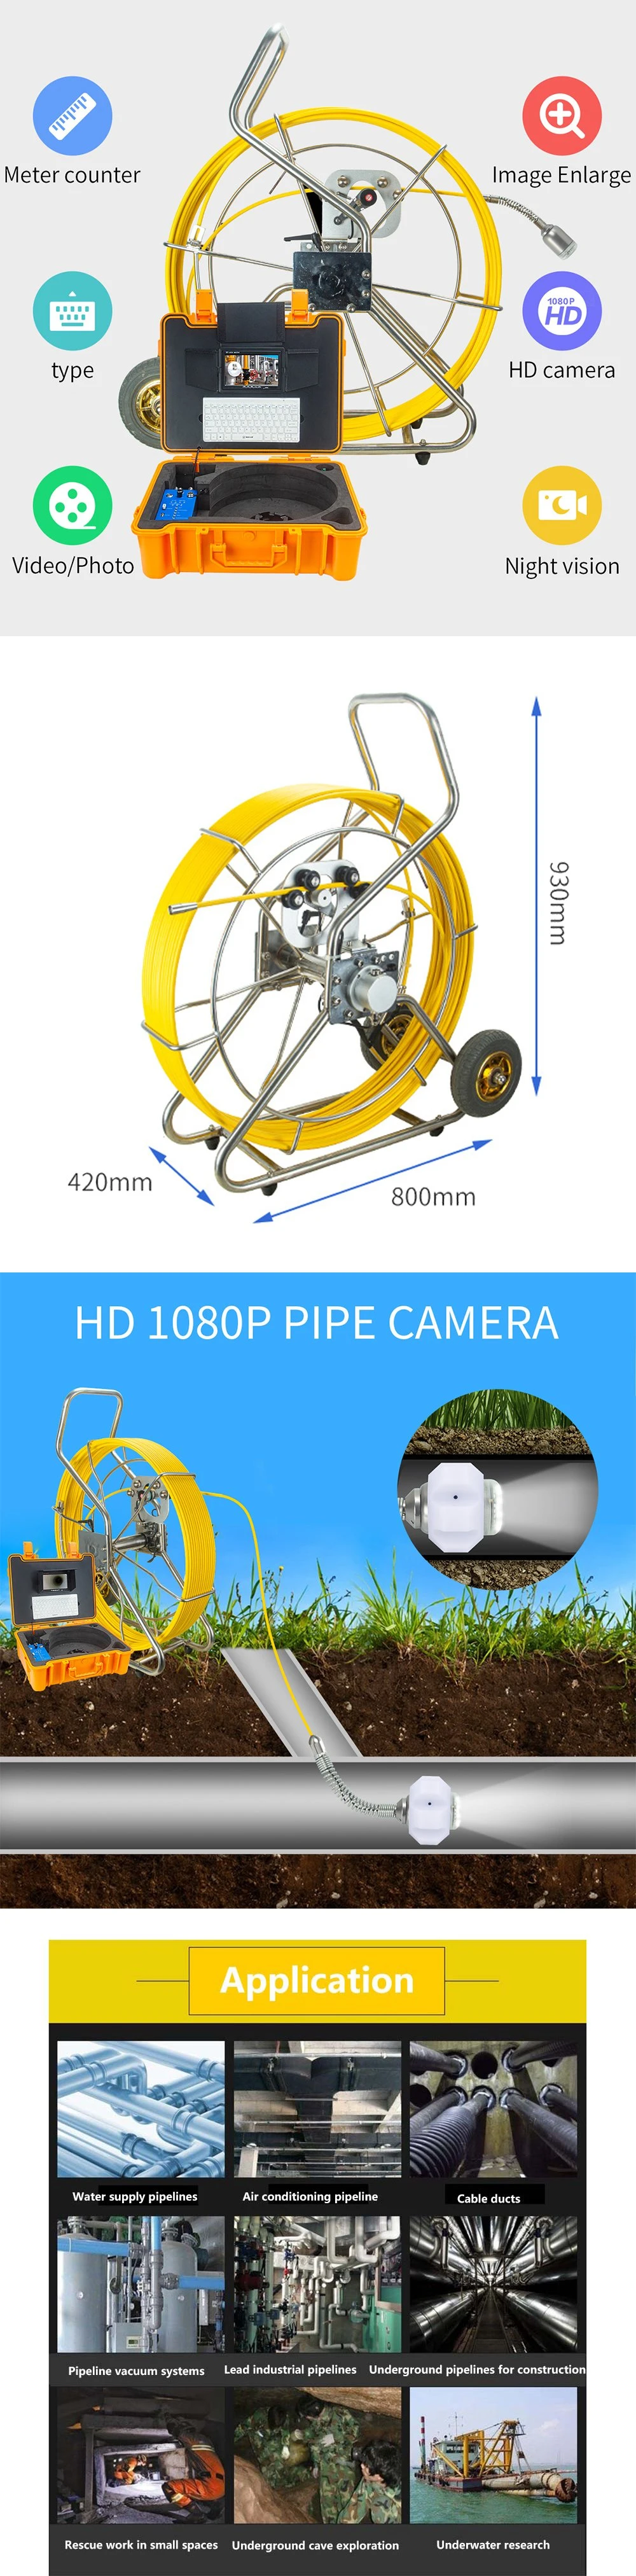 HD 1080P 50mm Lens Pipeline/Pipe Drain Wall Clean Inspection Endoscope Camera with 24PCS LED